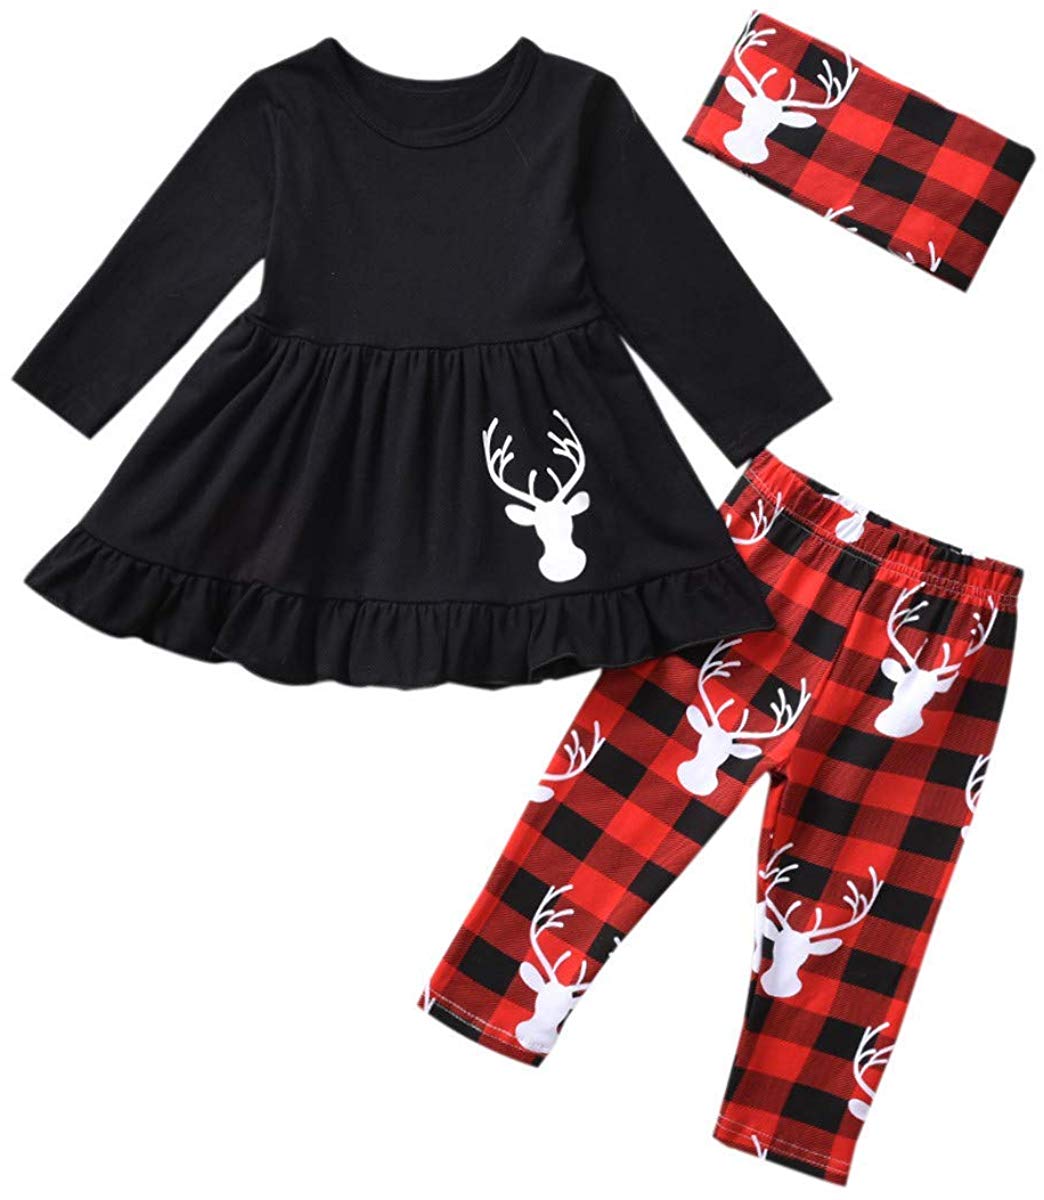 Toddler Girls Christmas Outfits